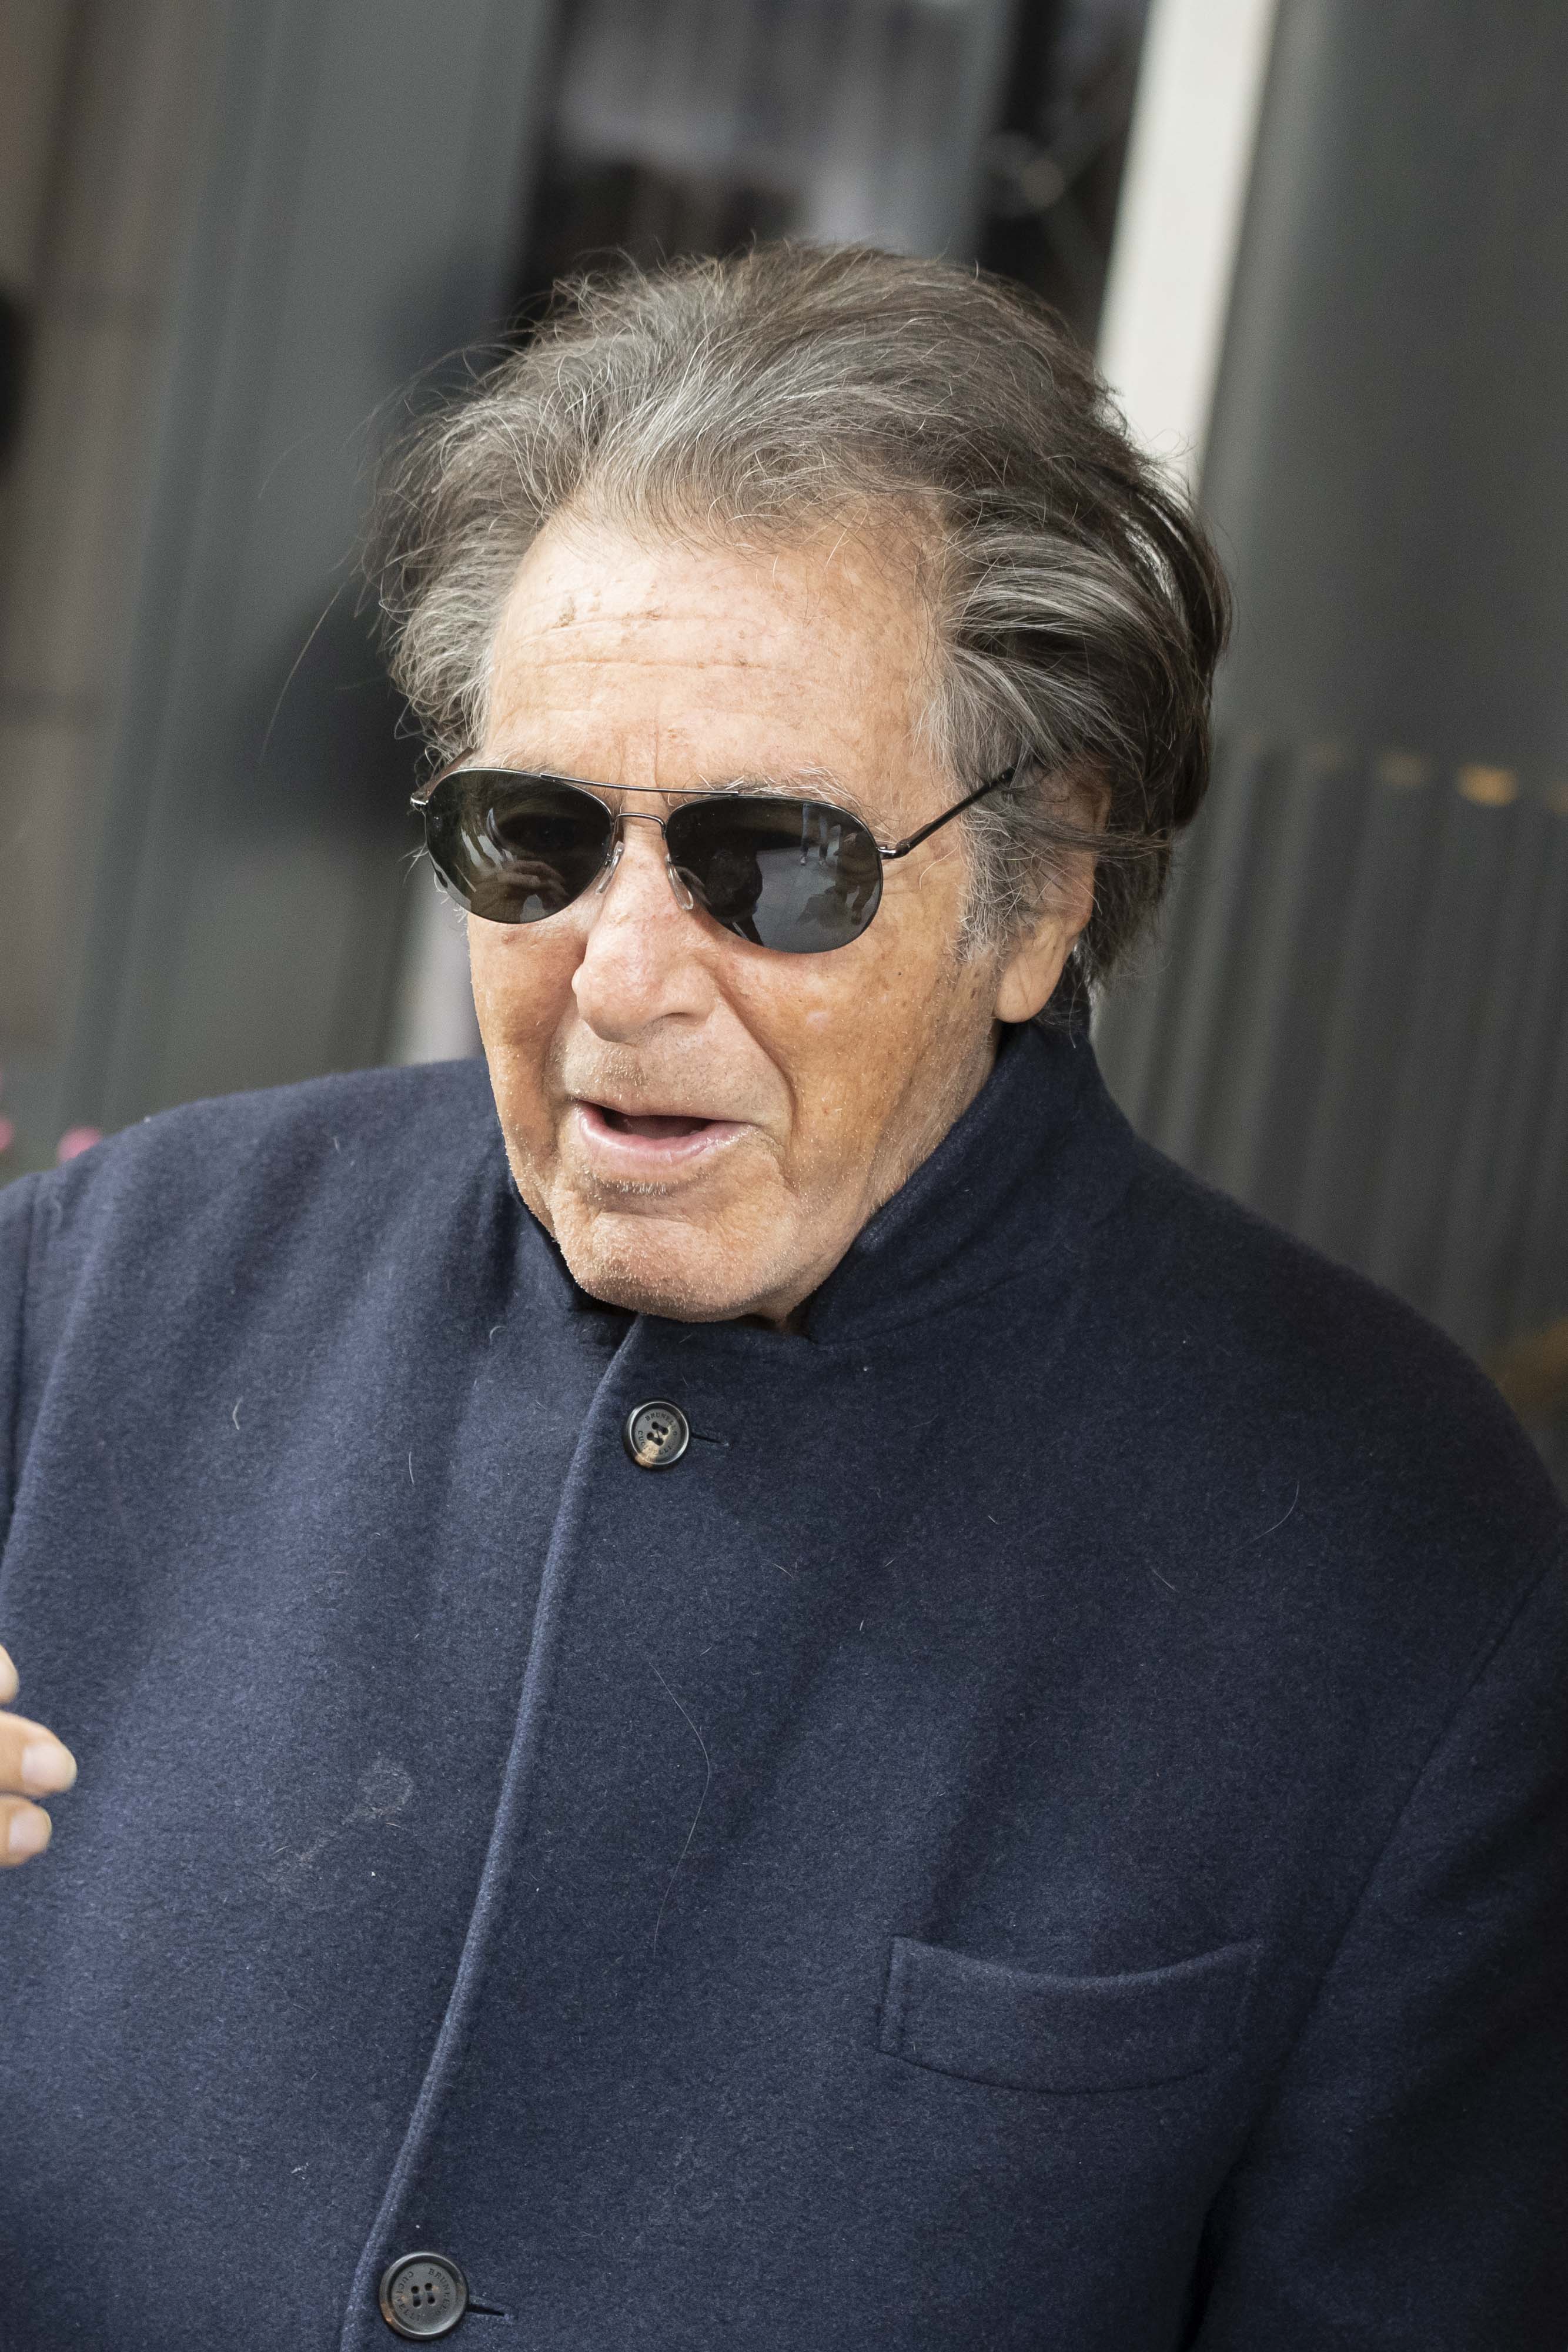 Al Pacino spotted at his hotel while on location for "House of Gucci" which was directed by Ridley Scott | Source: Getty Images